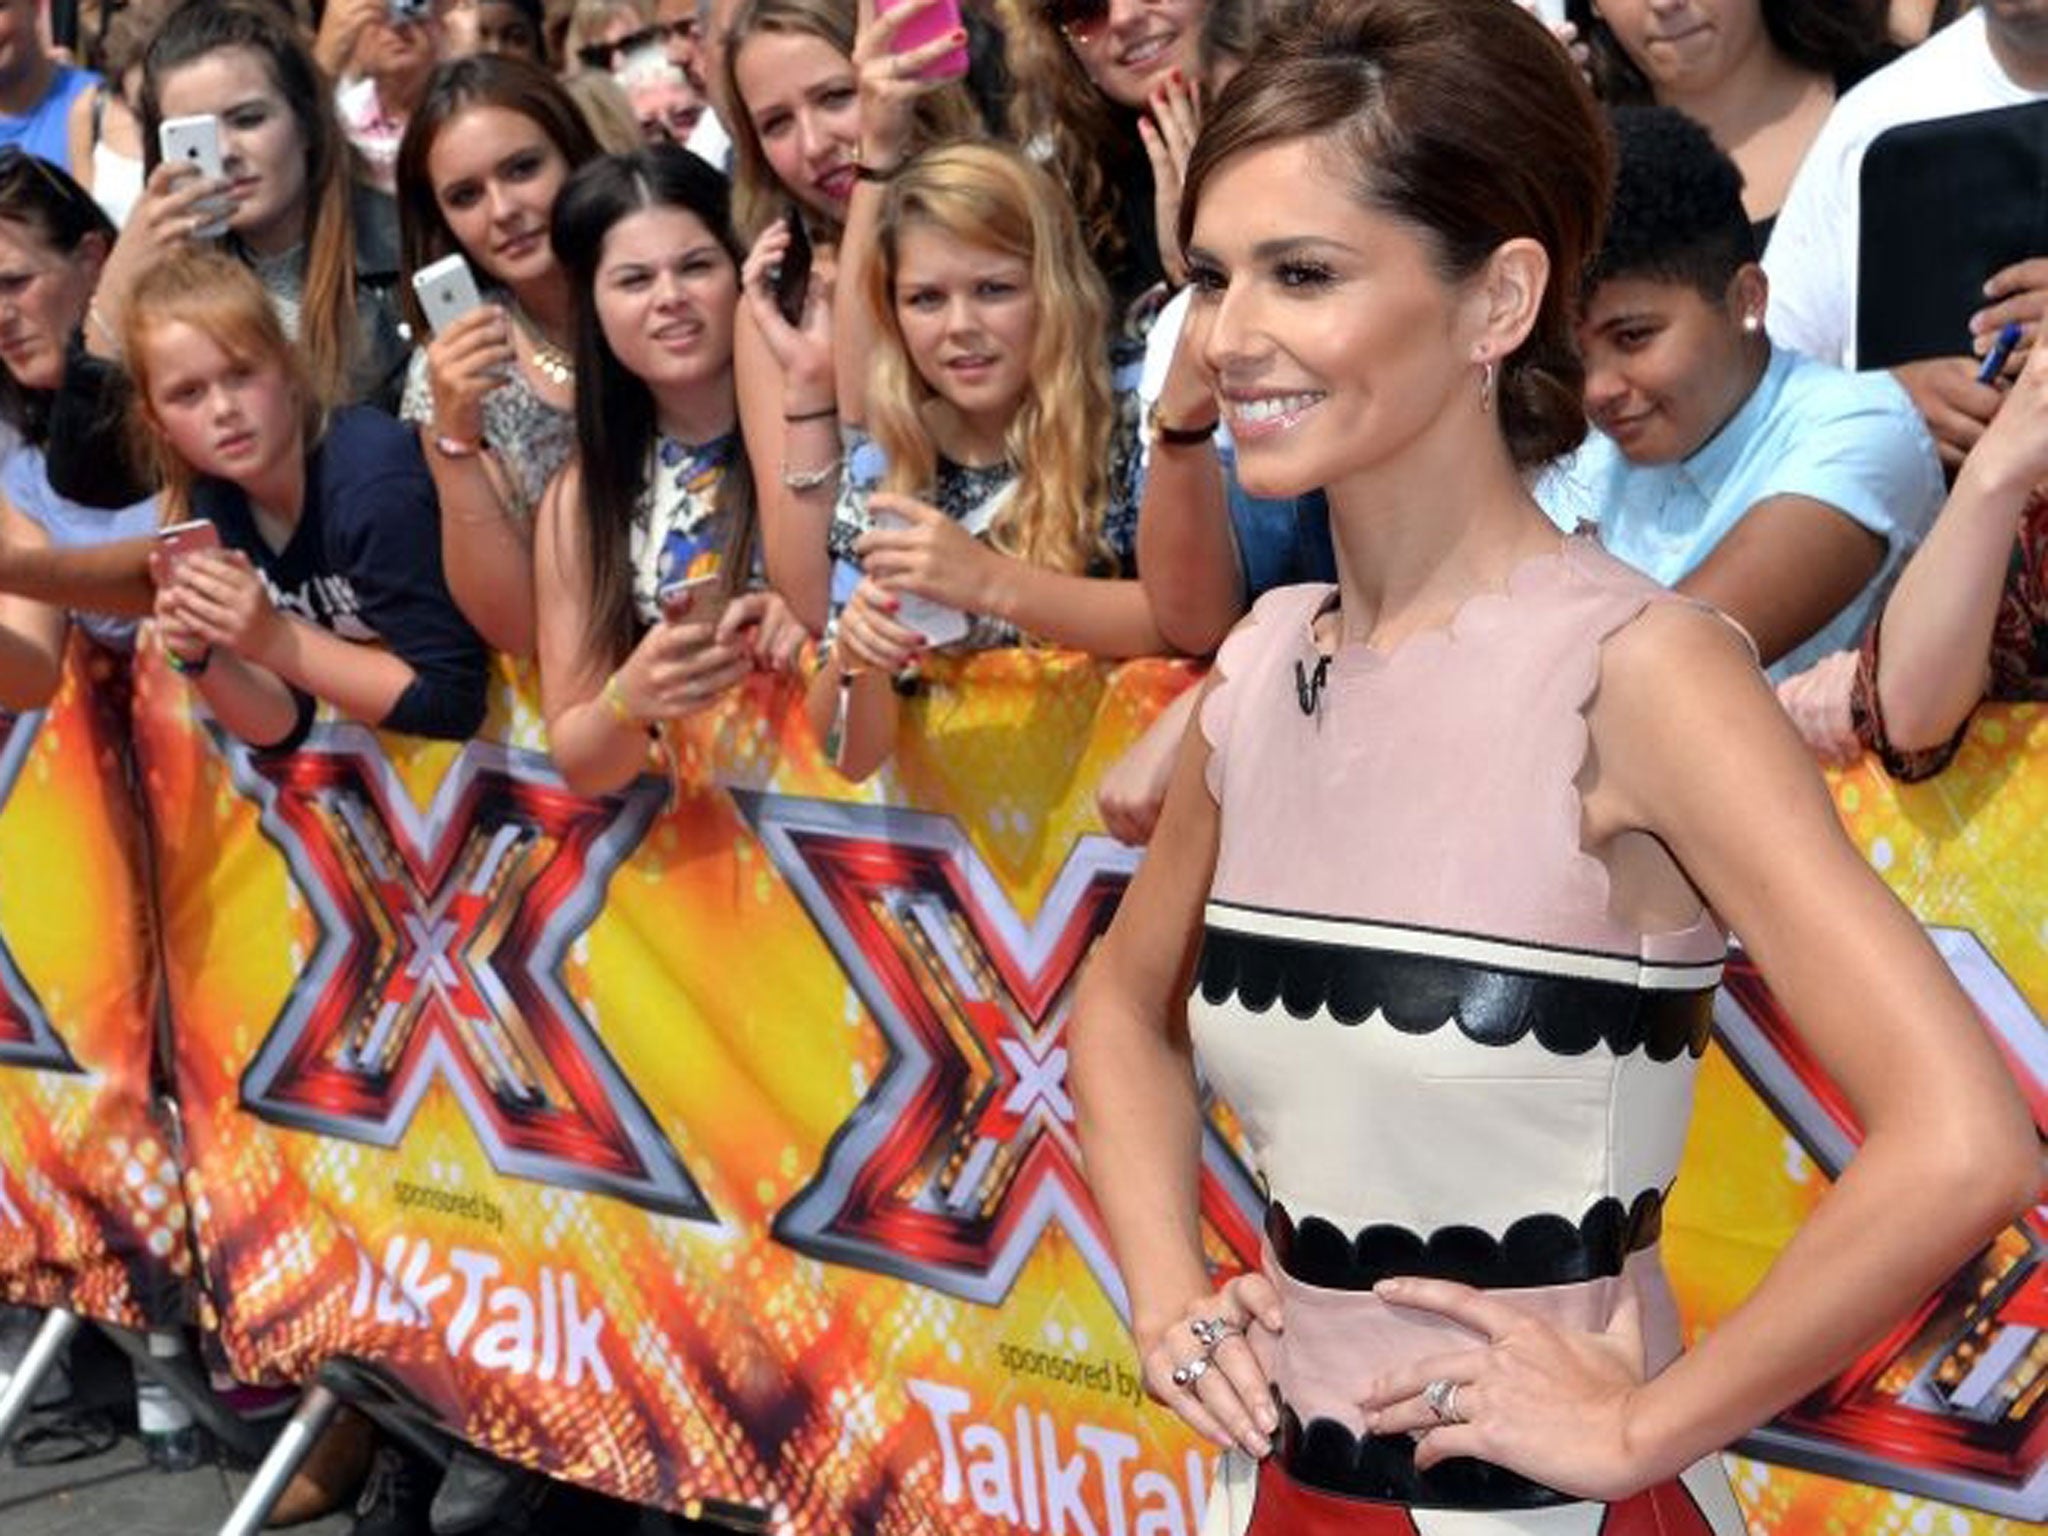 Cheryl Fernandez-Versini attends the London auditions of The X Factor at SSE Arena on July 16, 2015